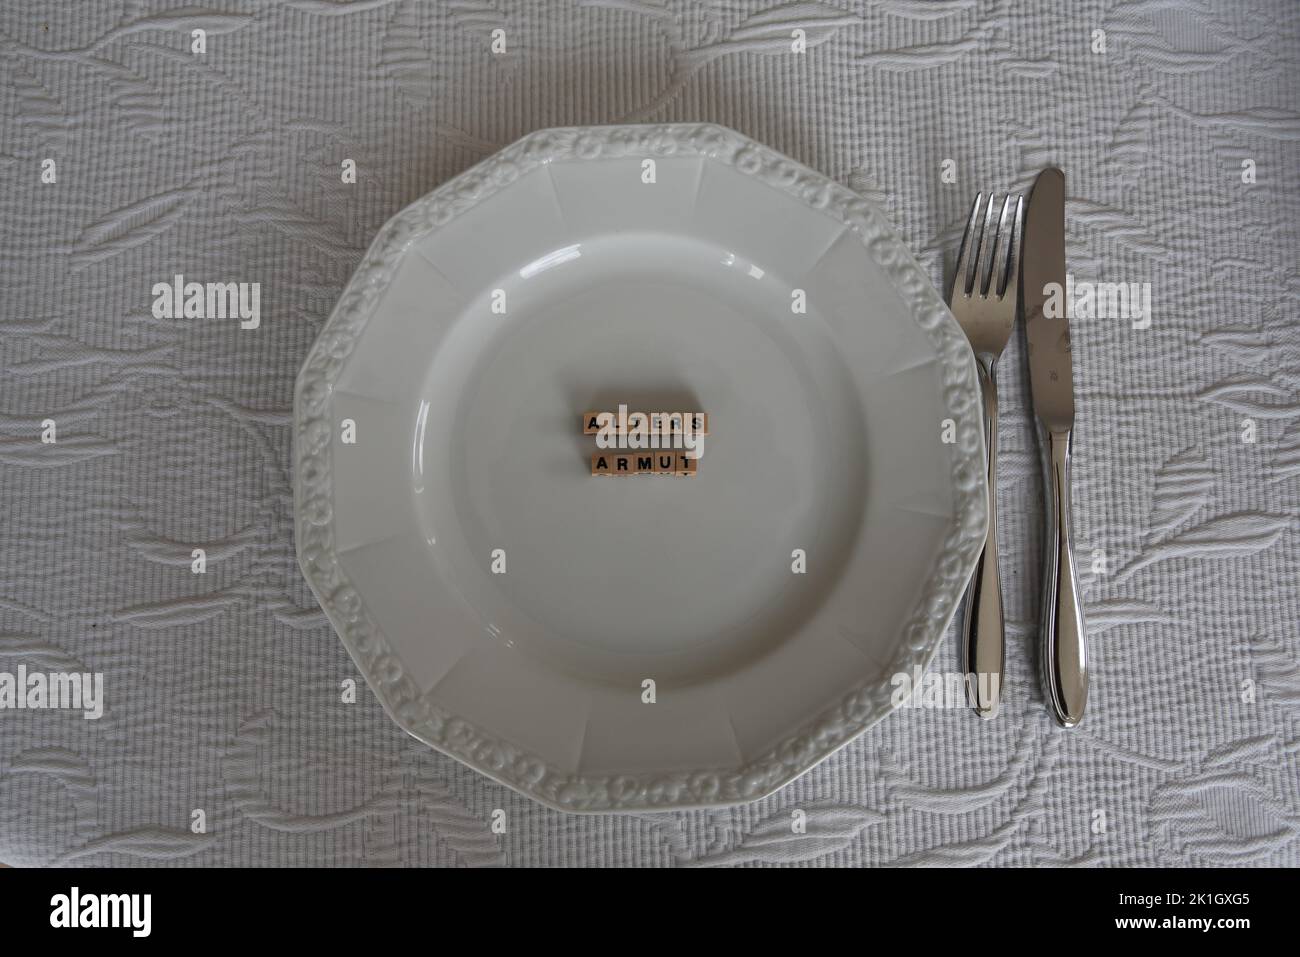 the german word for poverty with wodden bricks on a plate Stock Photo